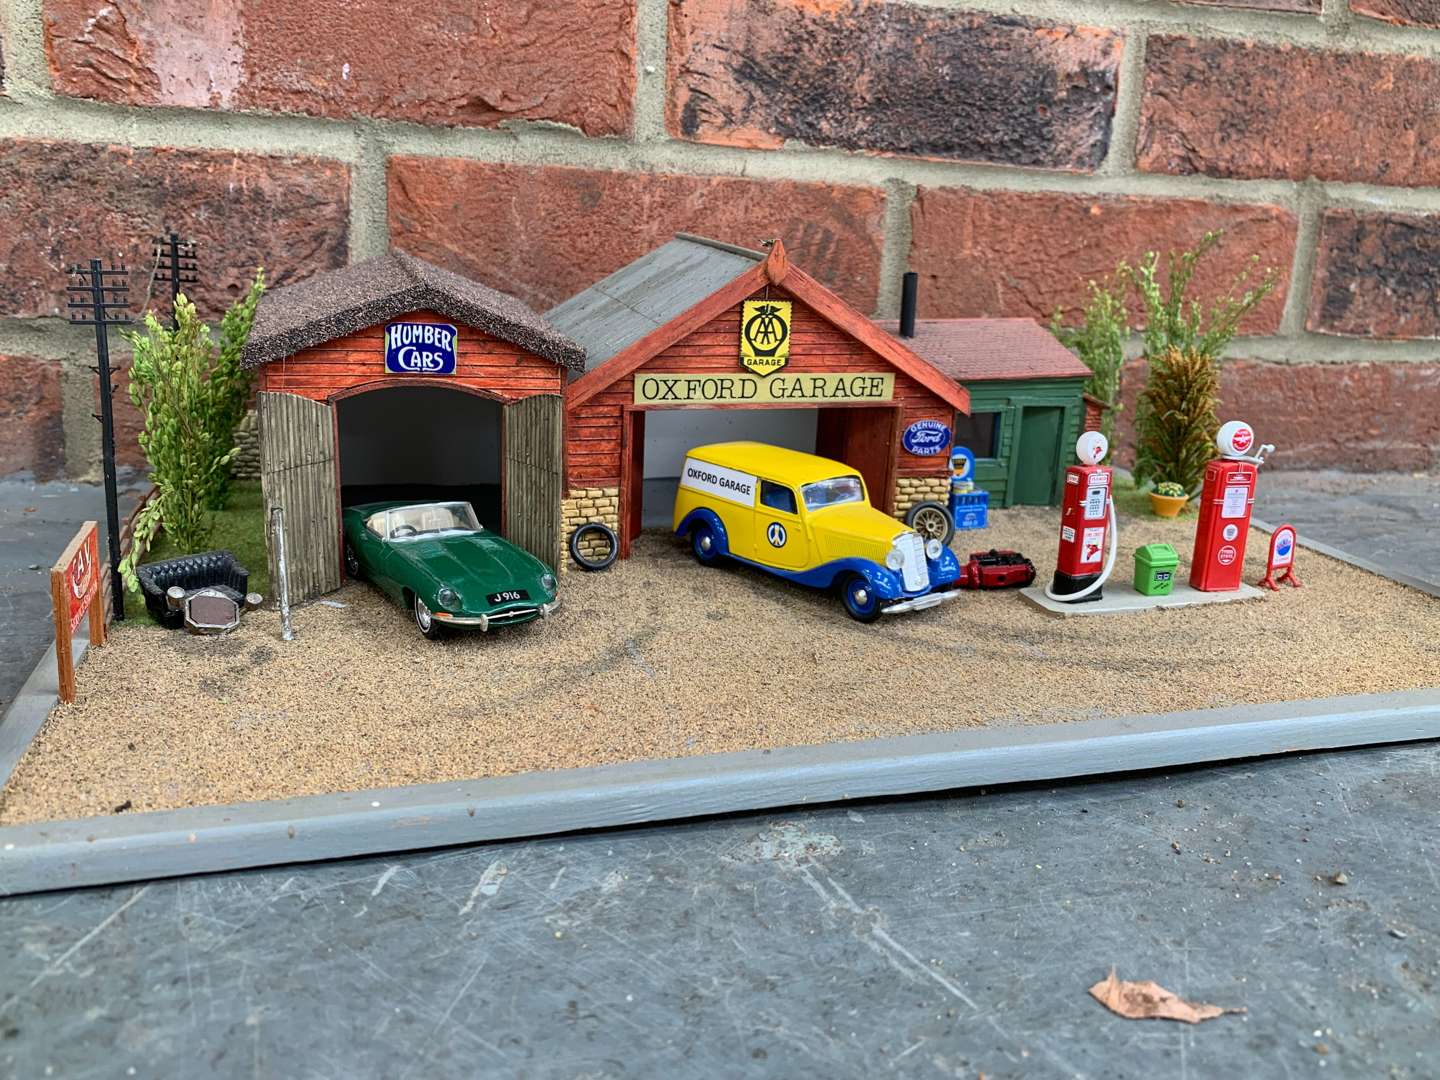 <p>1:43 Scale Oxford Garage Model and Cars</p>